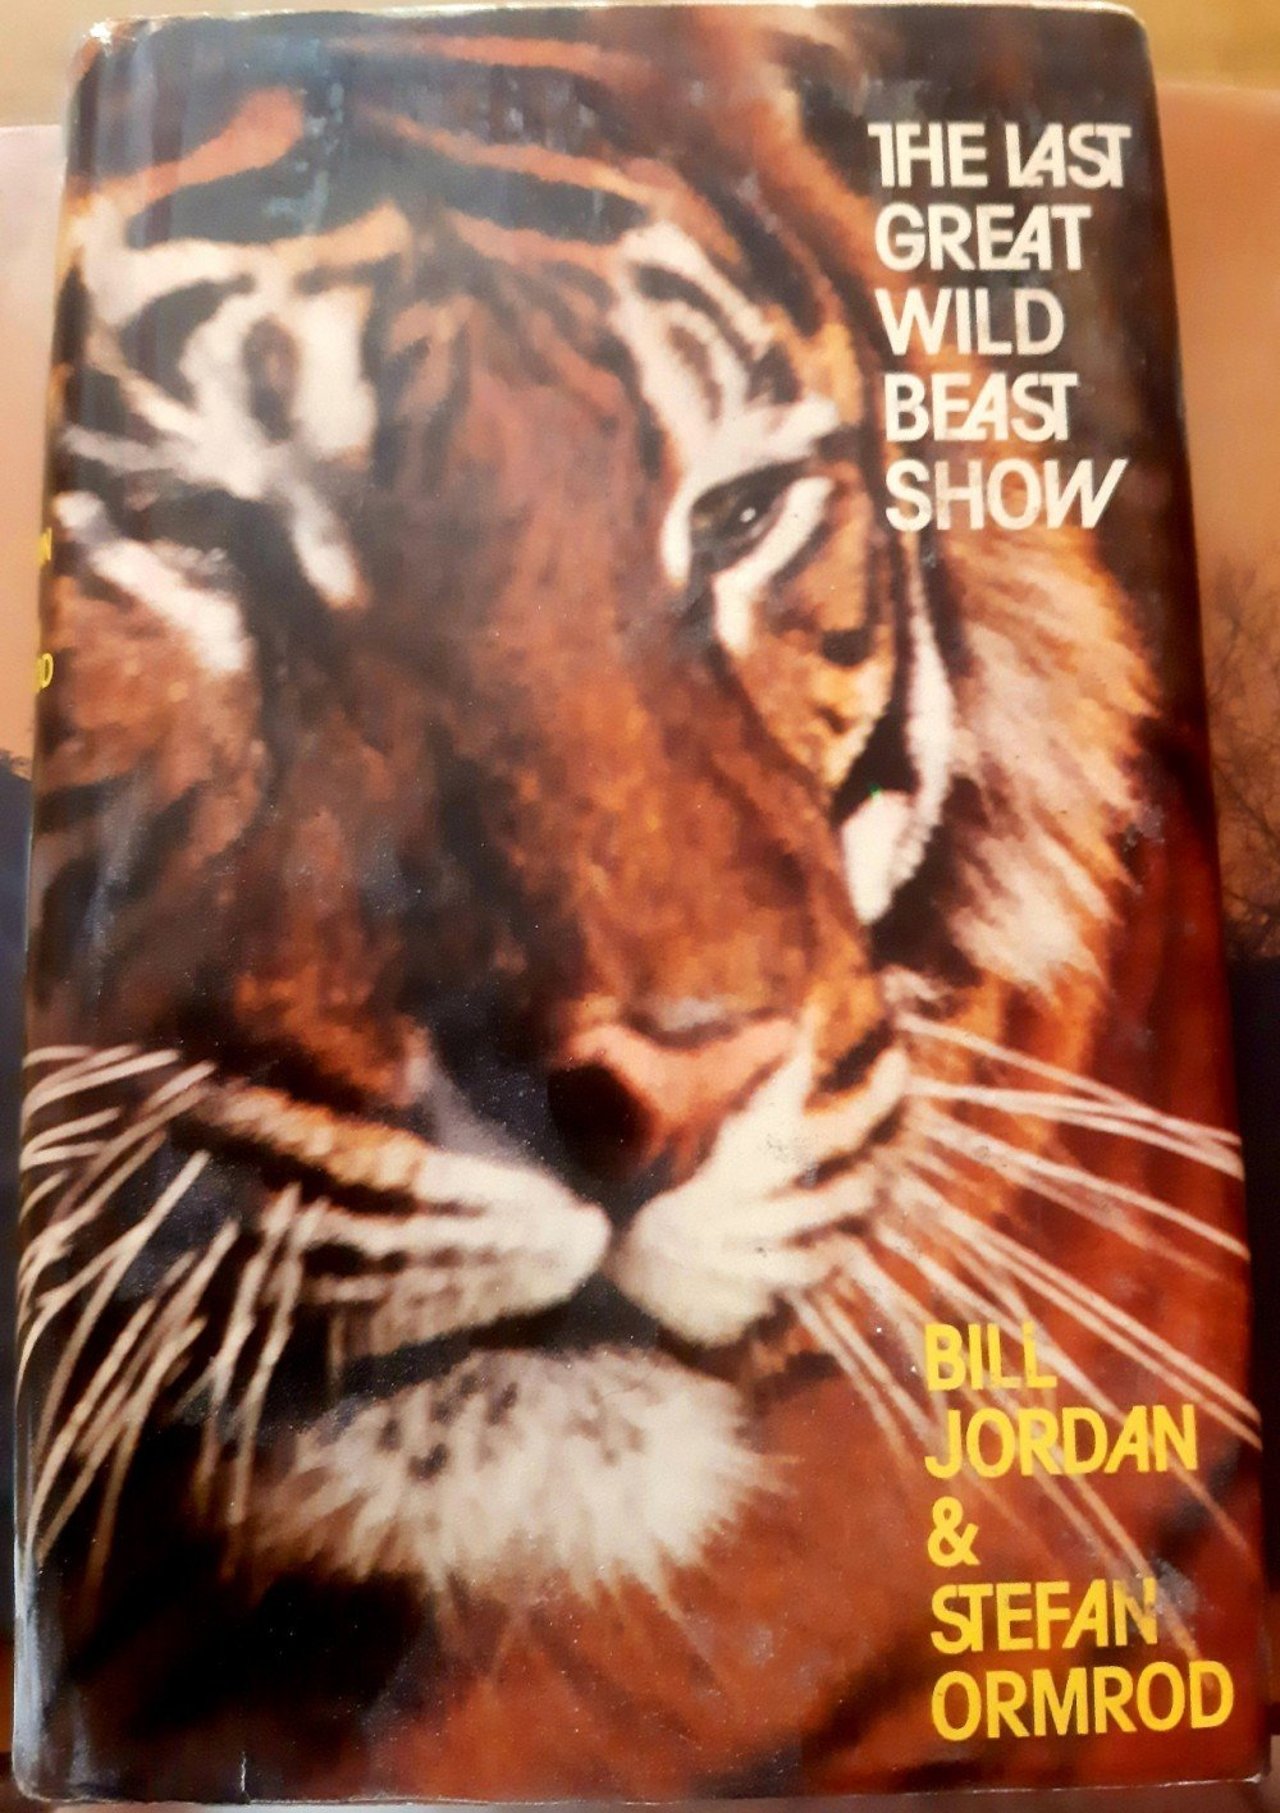  The Last Great Wild Beast Show by Bill Jordan and Stefan Ormrod is a landmark book critiquing the conditions of animals in zoos